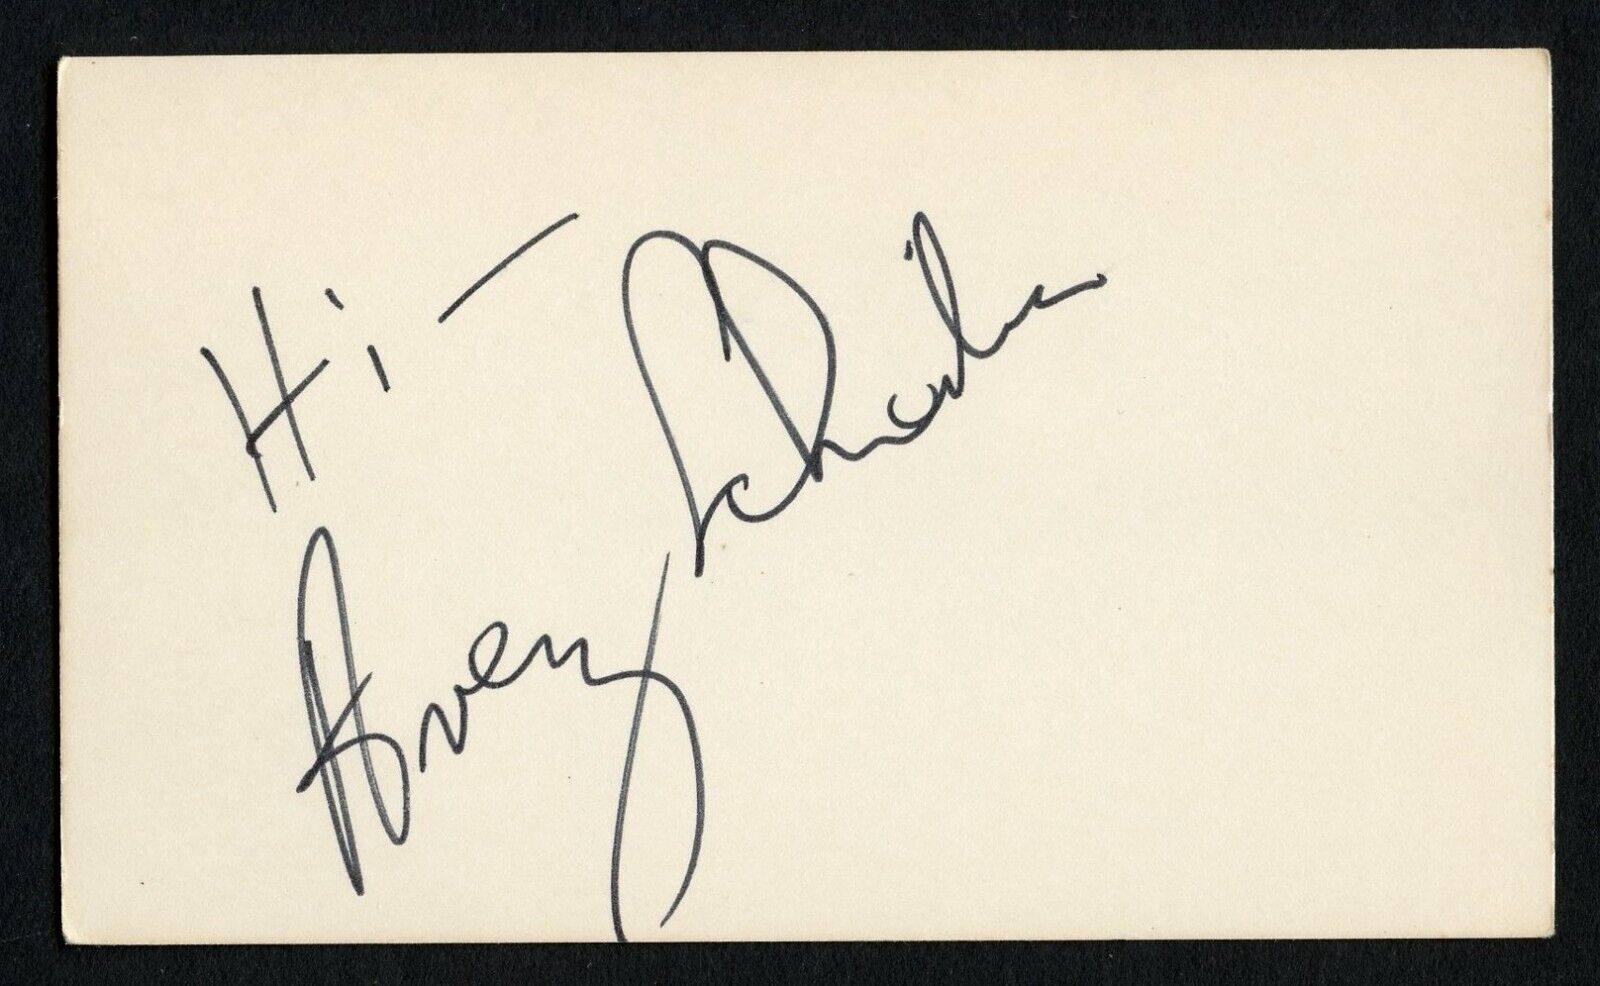 Avery Schreiber d2002 signed auto Vintage 3x5 Hollywood: Actor Chico & the Man